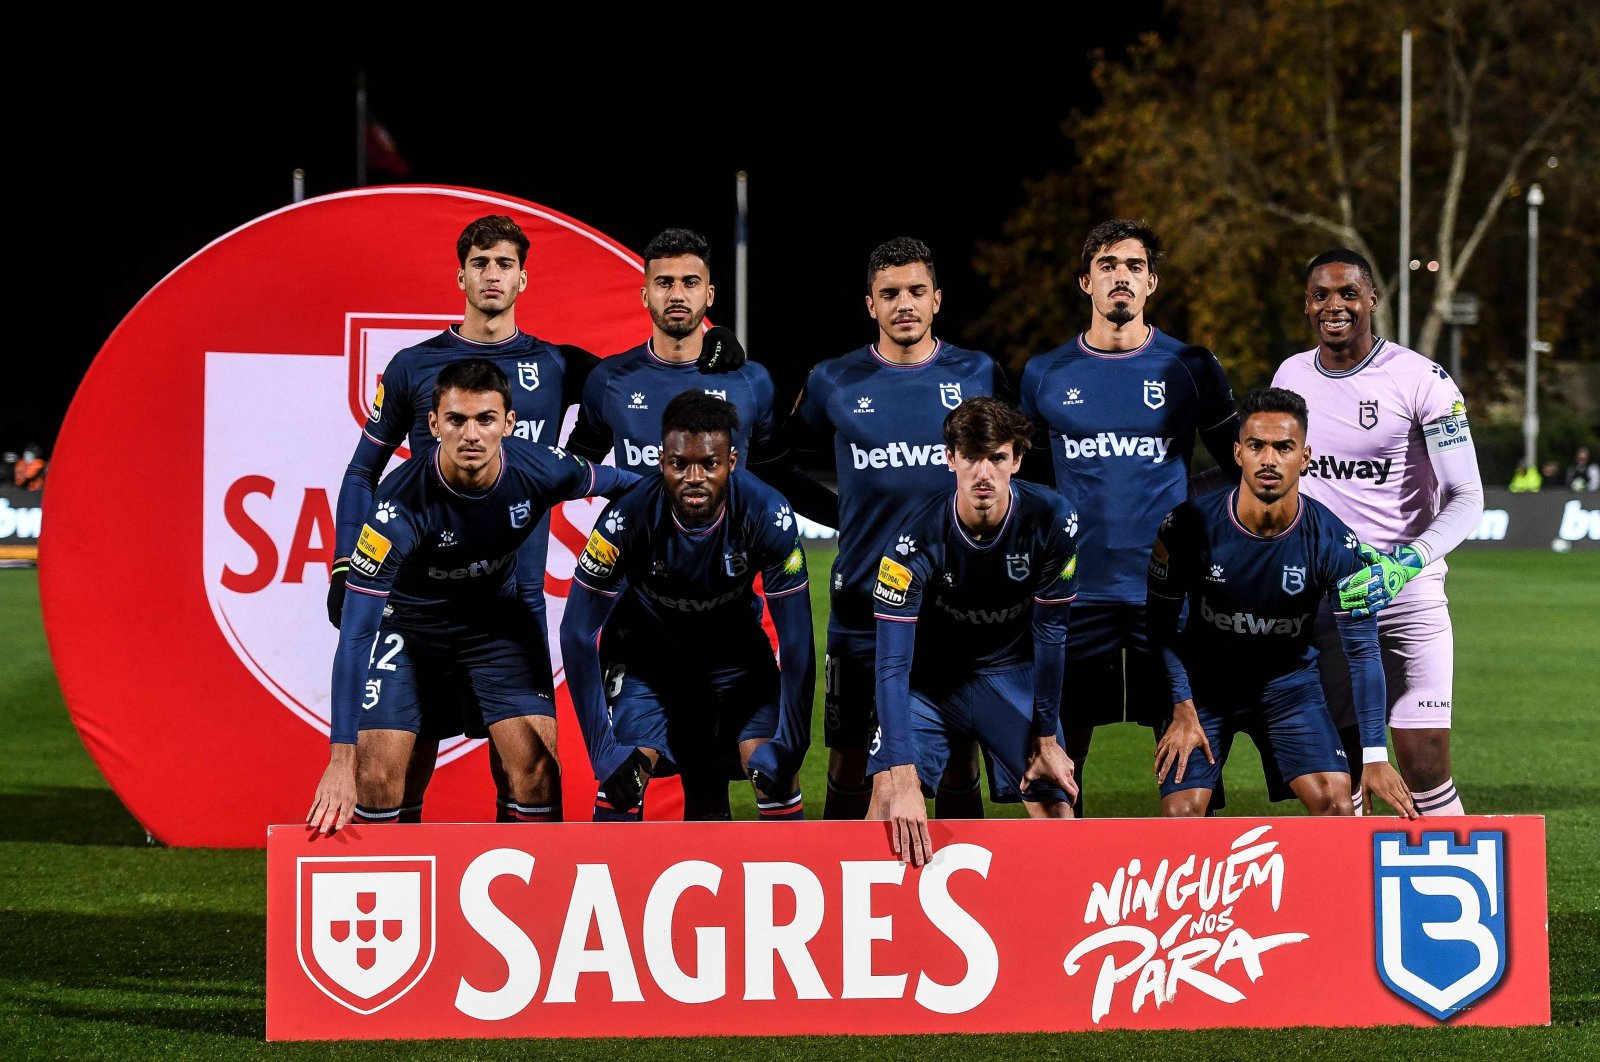 Belenenses players pose before the Portuguese league football match against Benfica at the Jamor stadium in Oeiras, Portugal, Nov. 27, 2021. (AFP Photo)